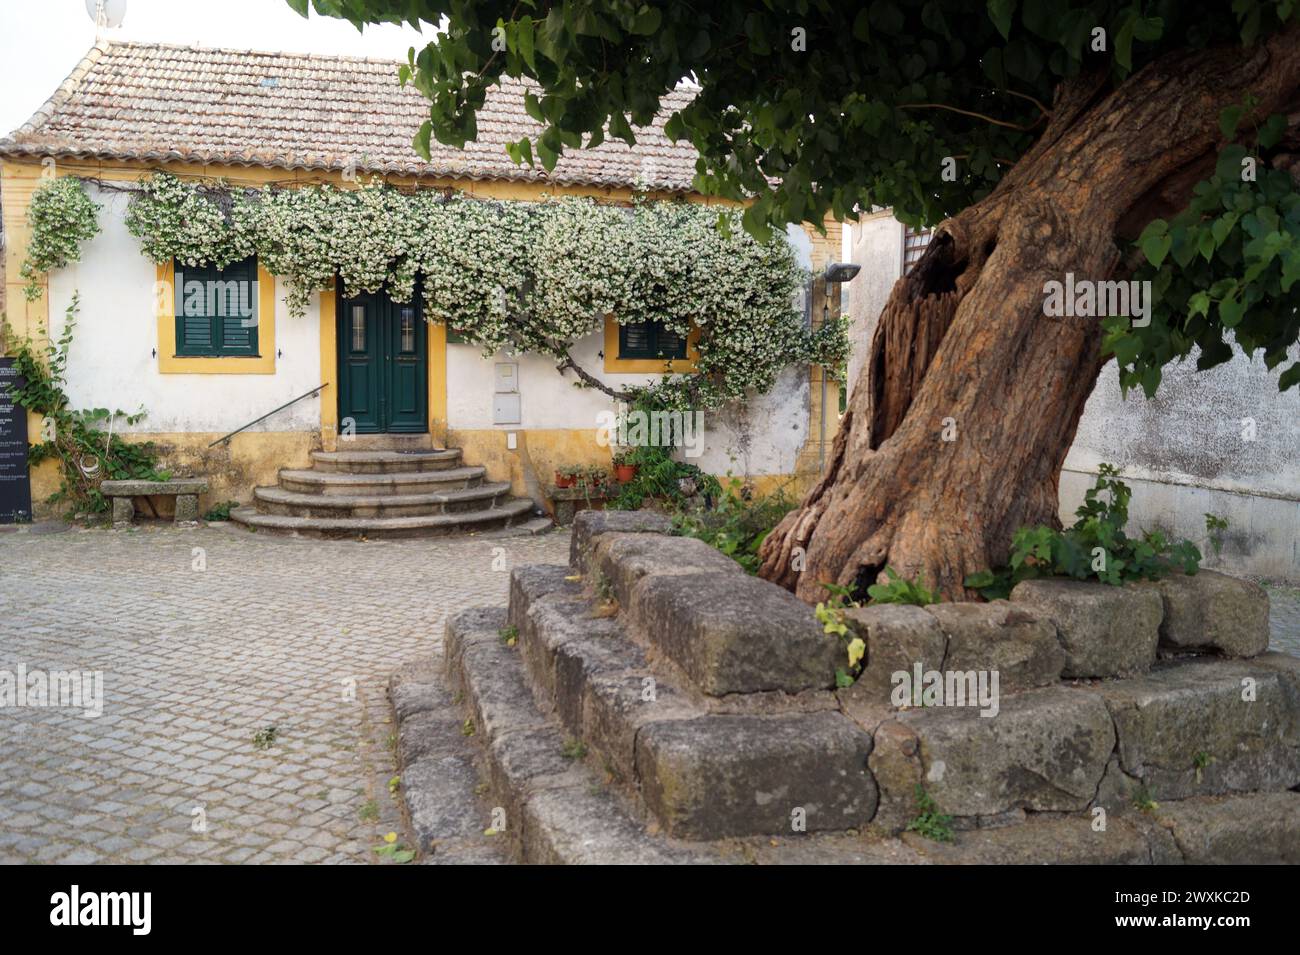 Old gnarled linden tree in the village square, Idanha-a-Velha, Portugal Stock Photo